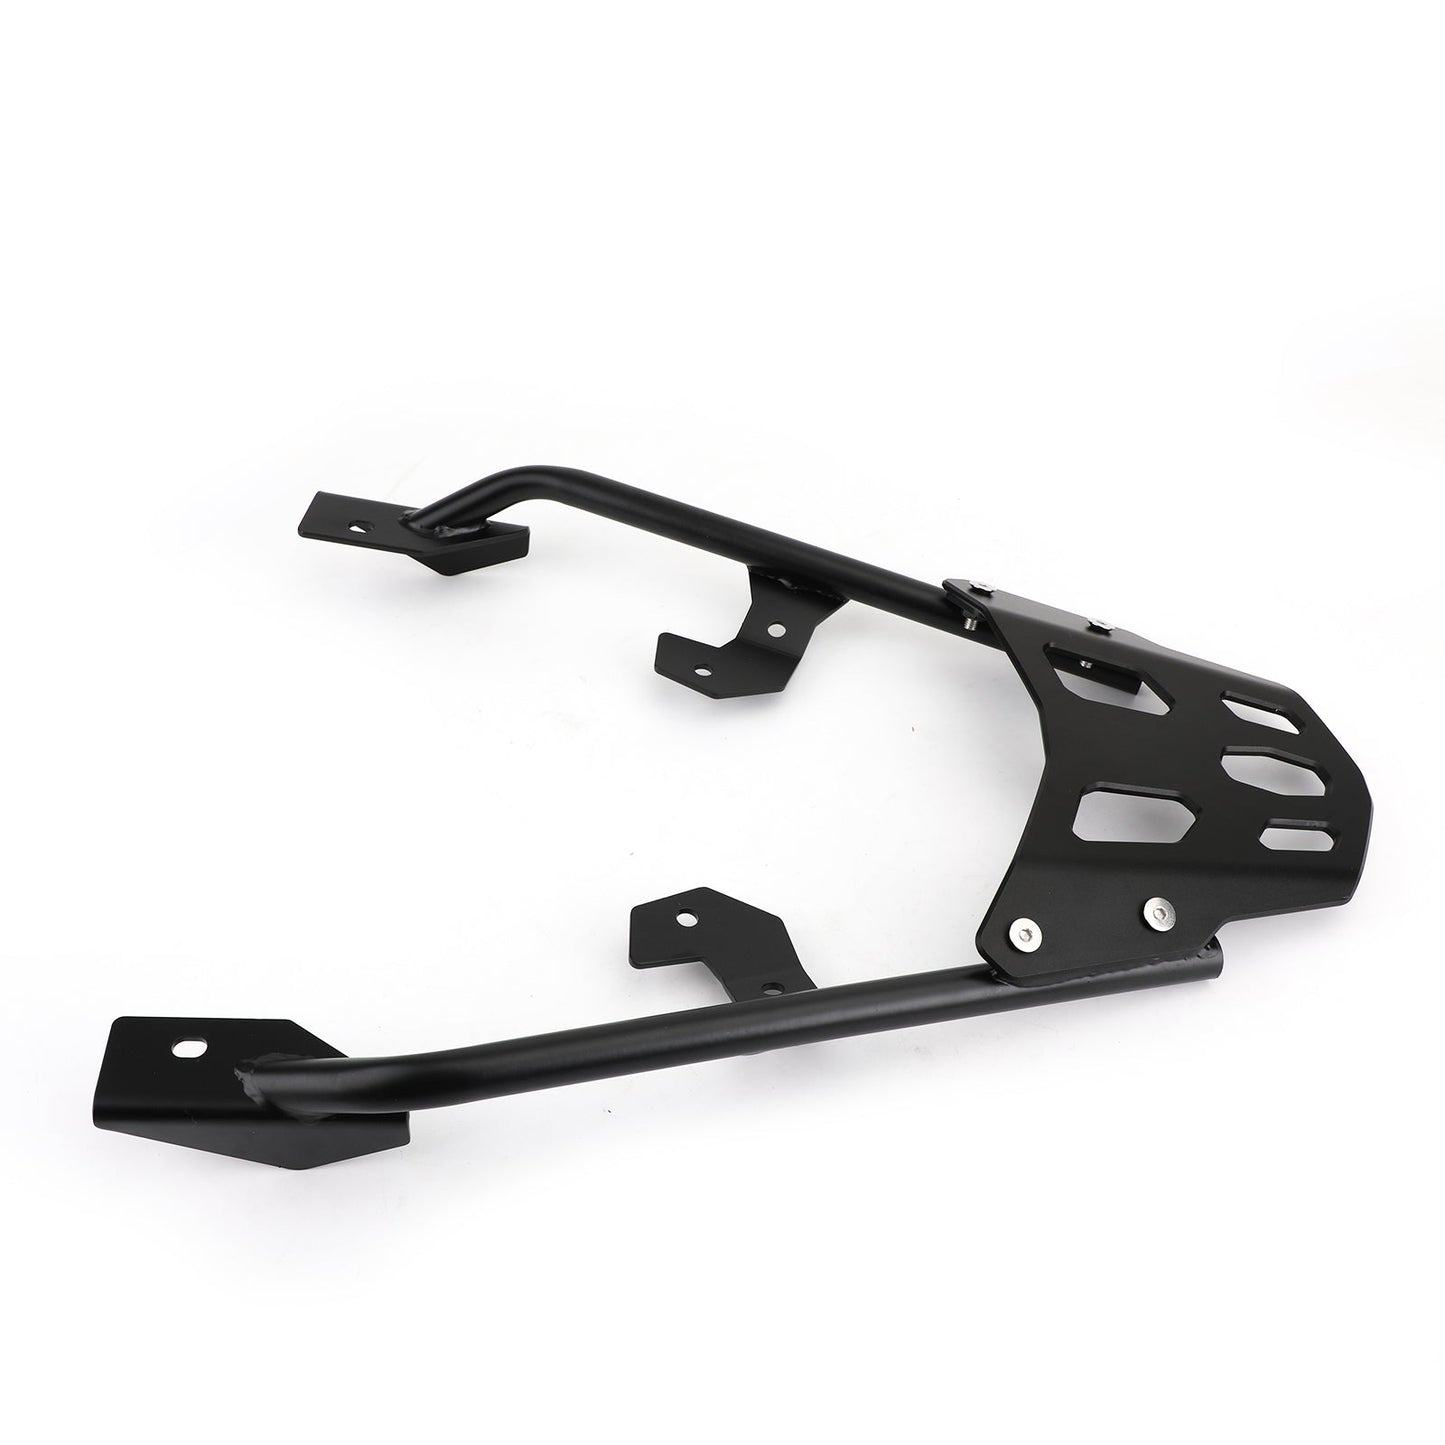 Rear Top Case Carrier Luggage Rack Fit for Honda X-ADV 750 XADV 750 2016-2020